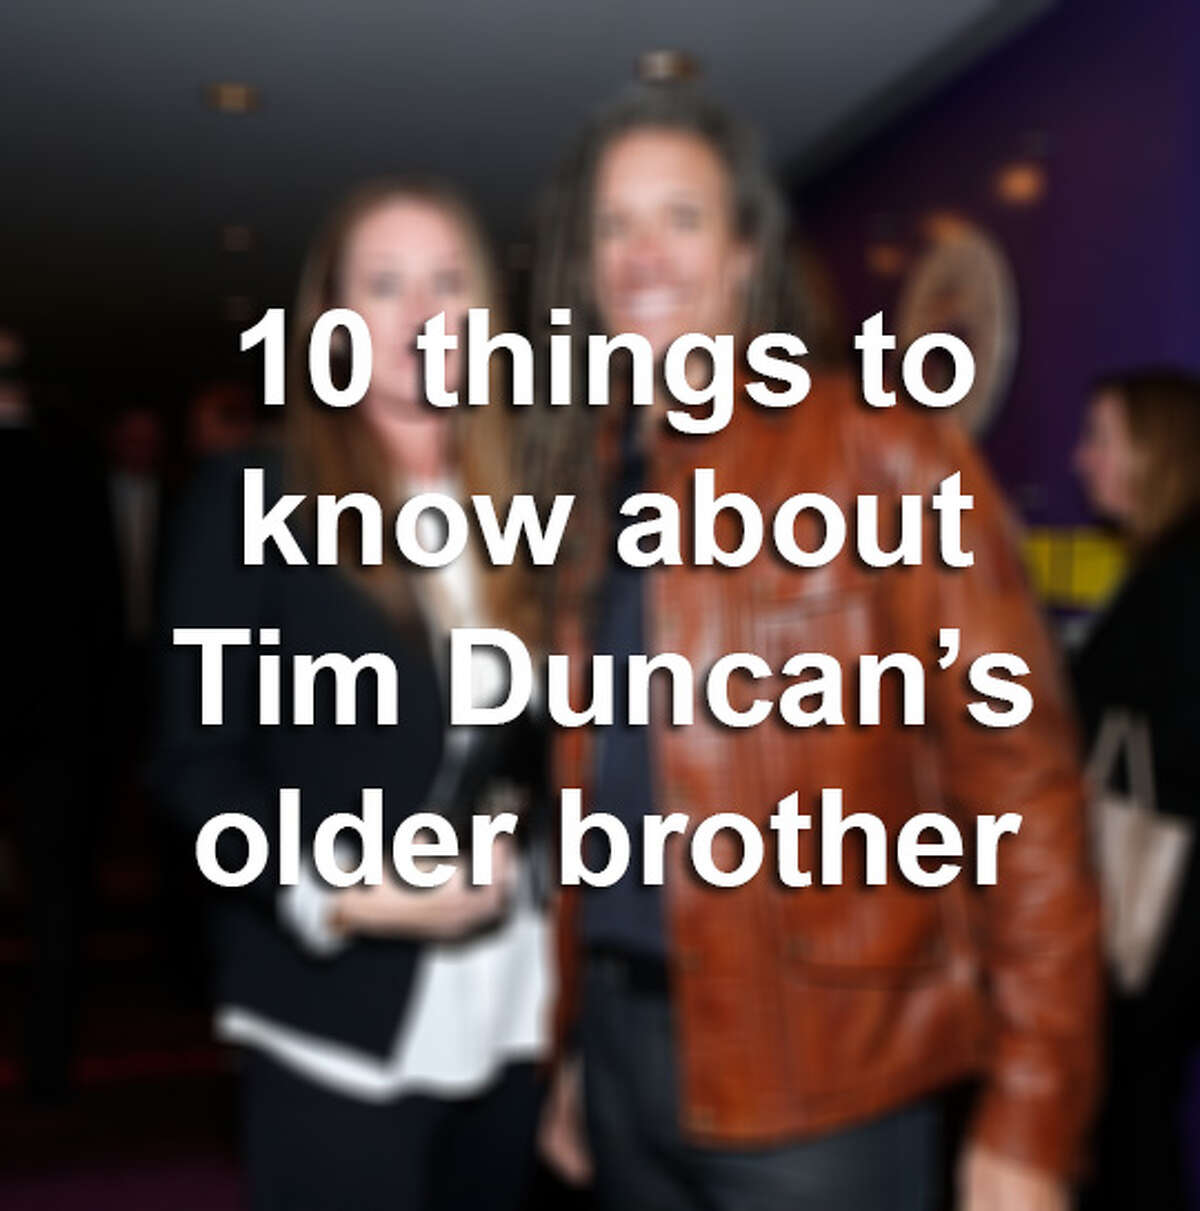 Click through the gallery to learn 10 things about Tim Duncan's brother.